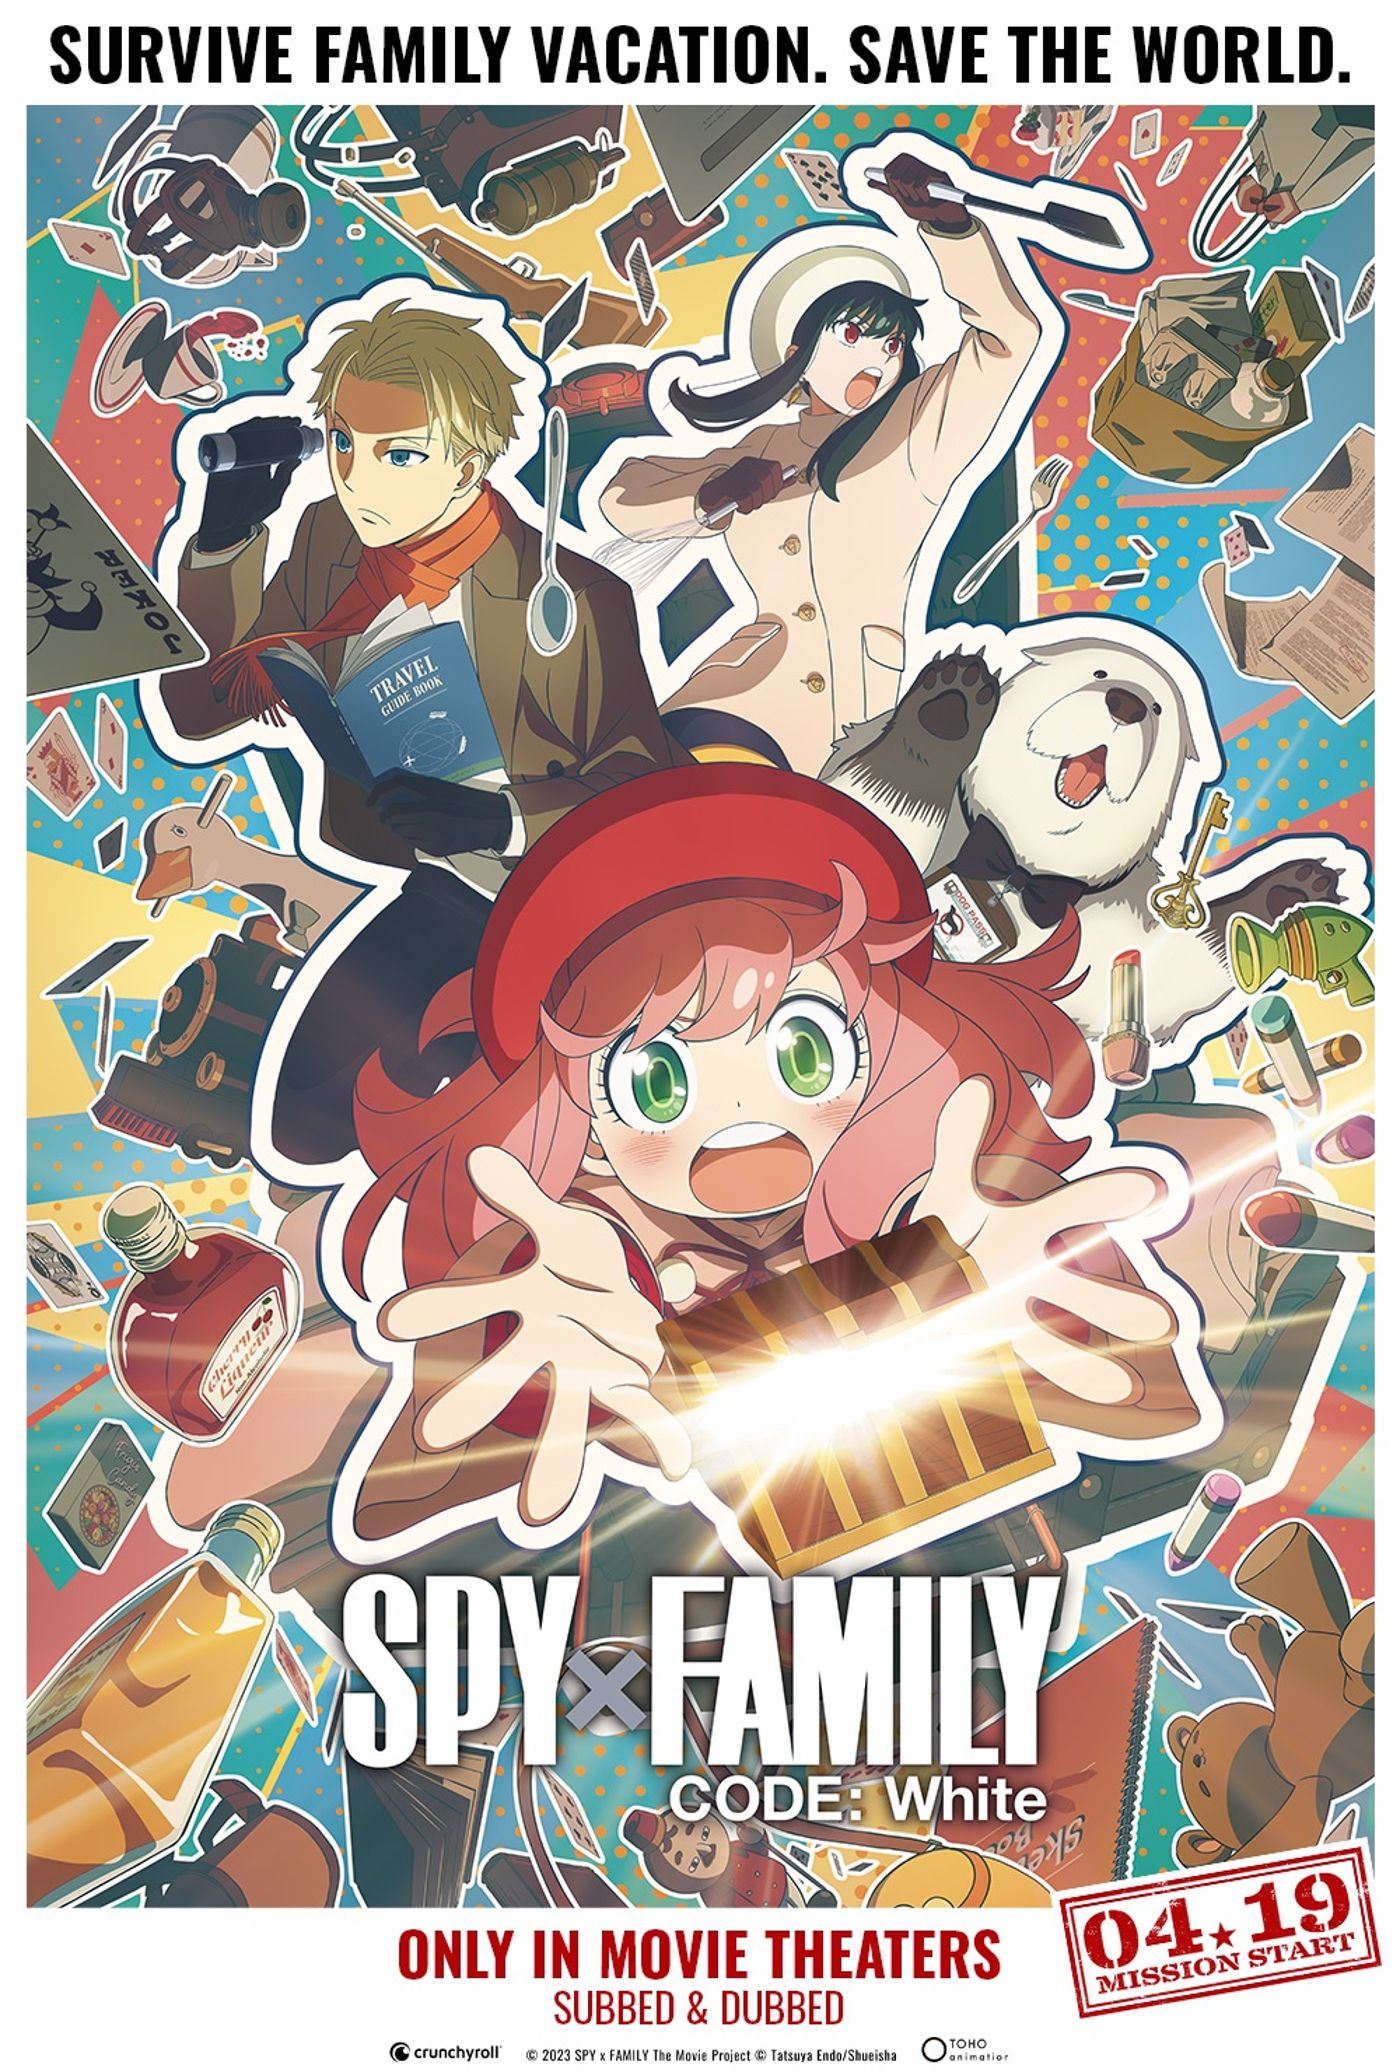 Review: Spy x Family CODE: White Offers a Fun Adventure Even New Fans Can Enjoy